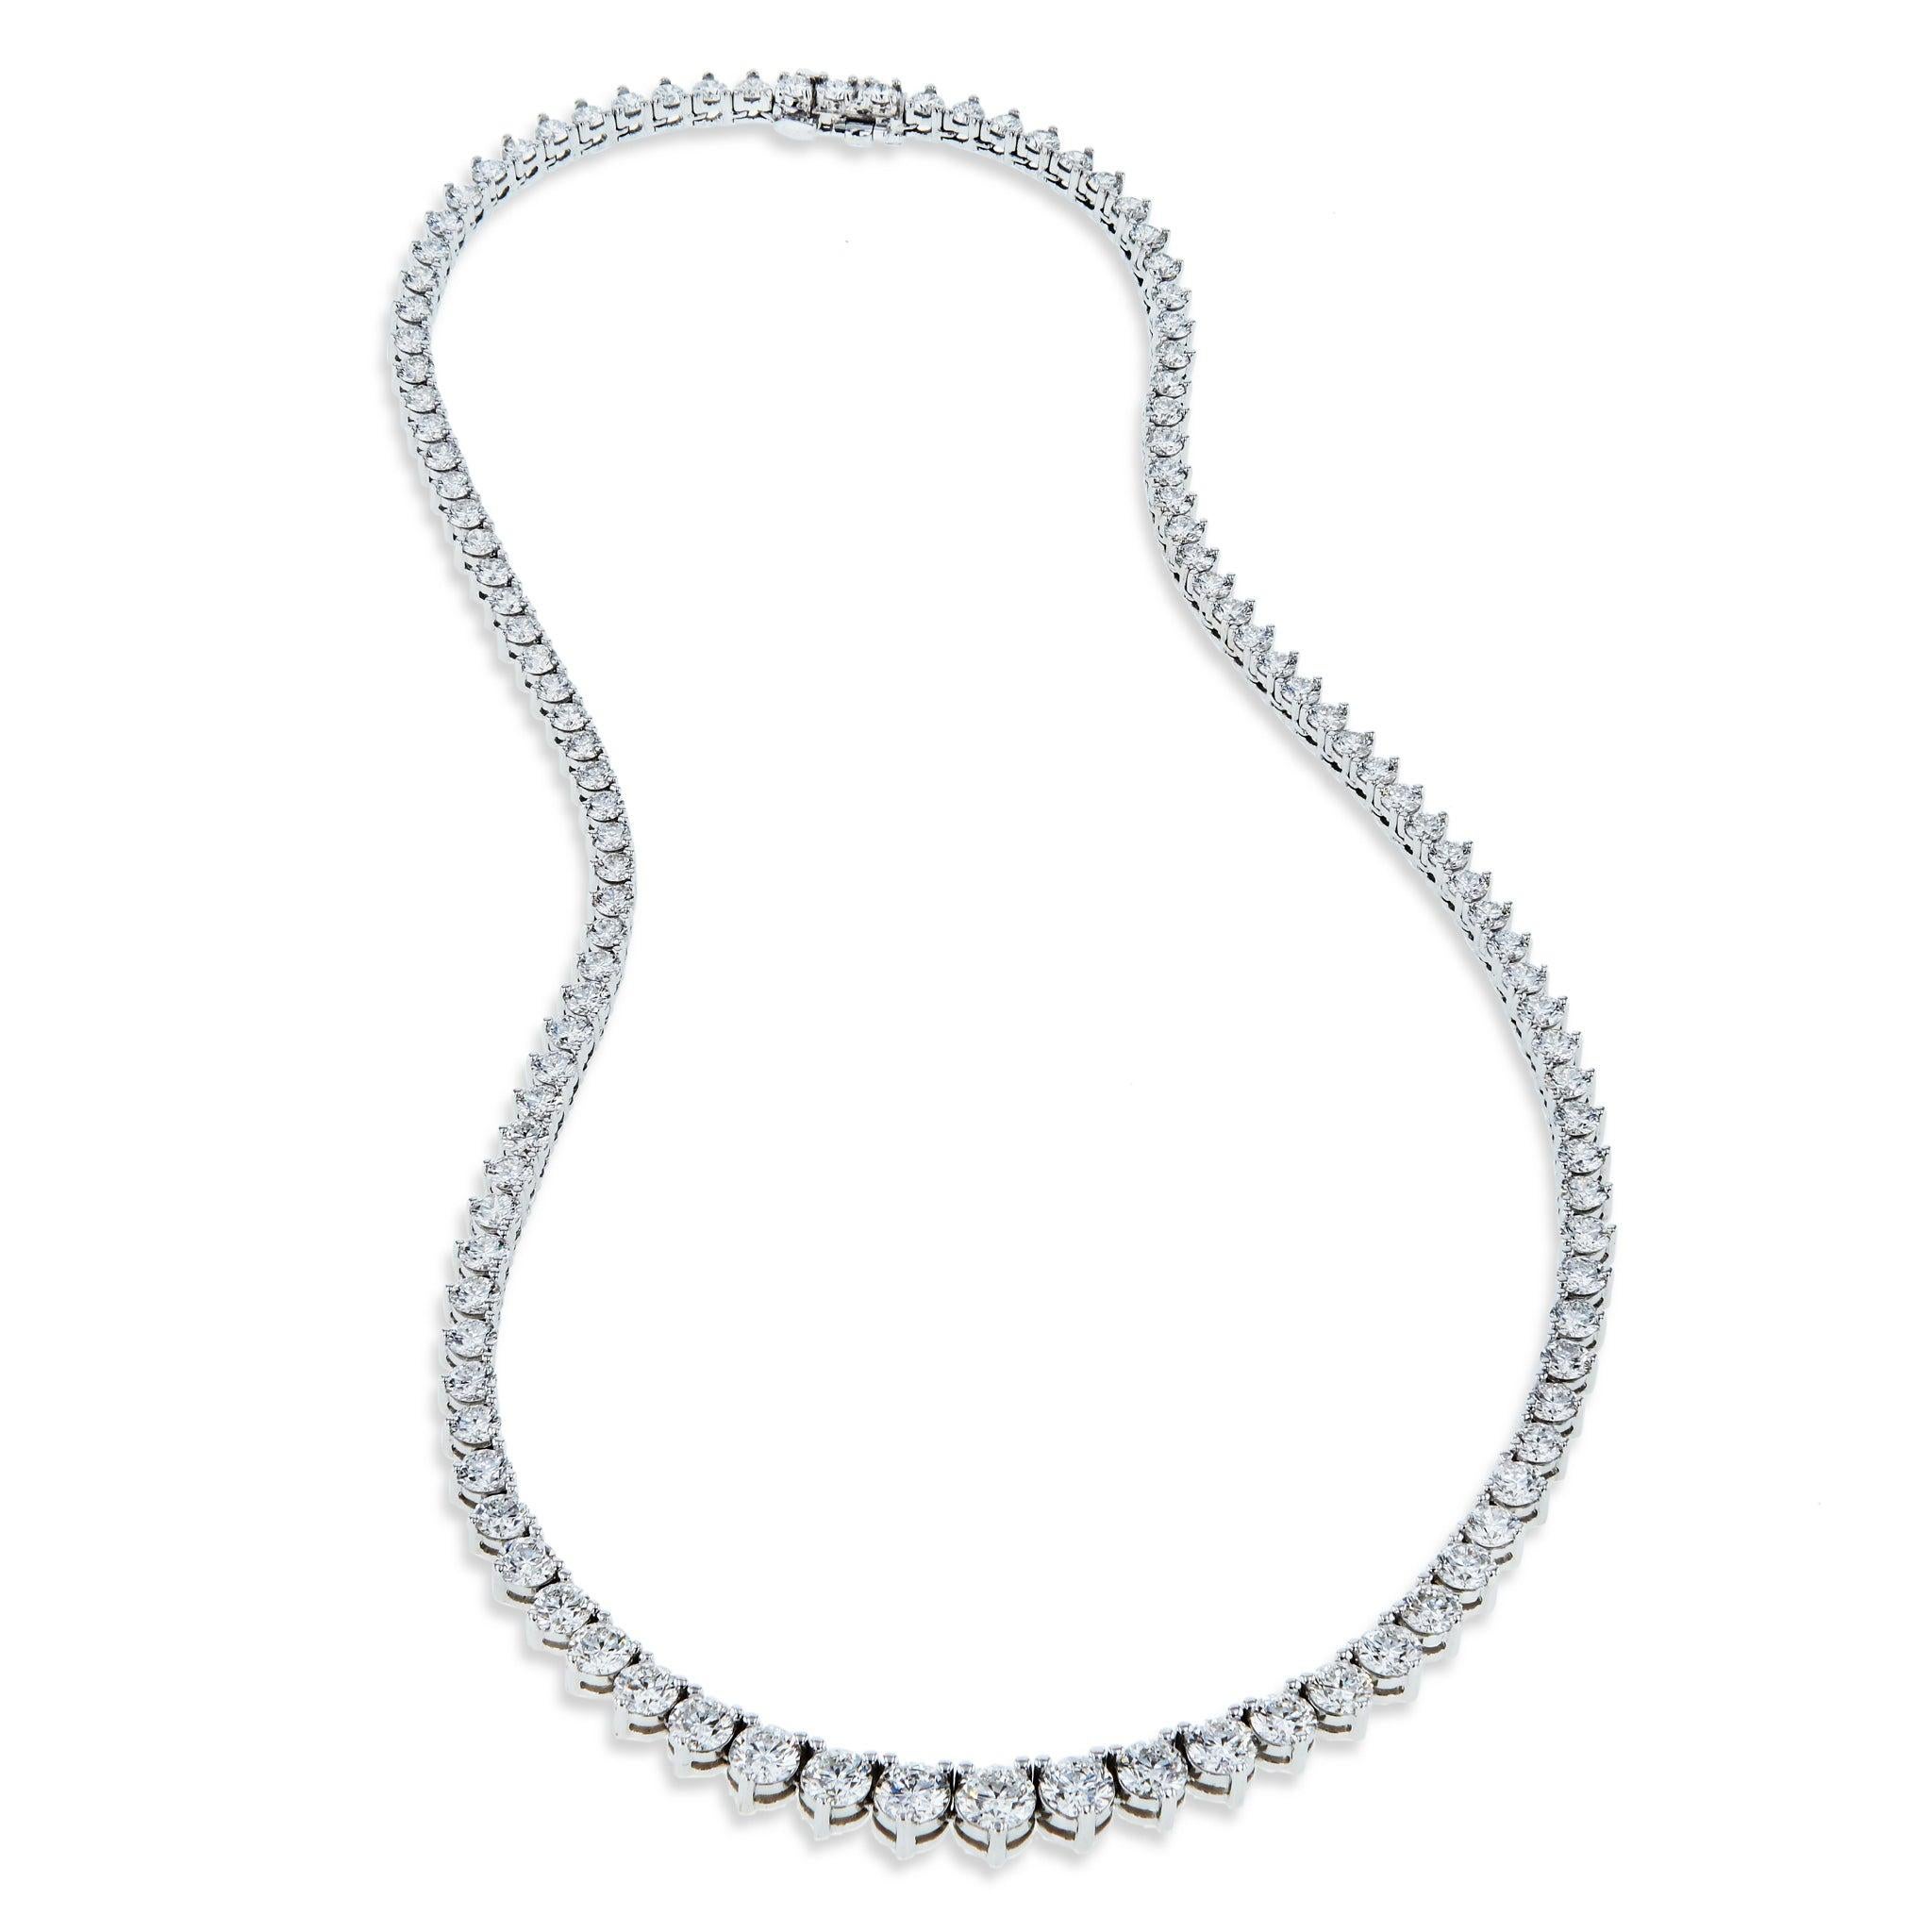 This gorgeous Riviera necklace features 15.44 carats of dazzling brilliant cut diamonds in F/G color with VS1/SI1 clarity (EX,VG cut). 

This stunning necklace graduates in size towards the center where the largest stones are. 
It is handmade in 18